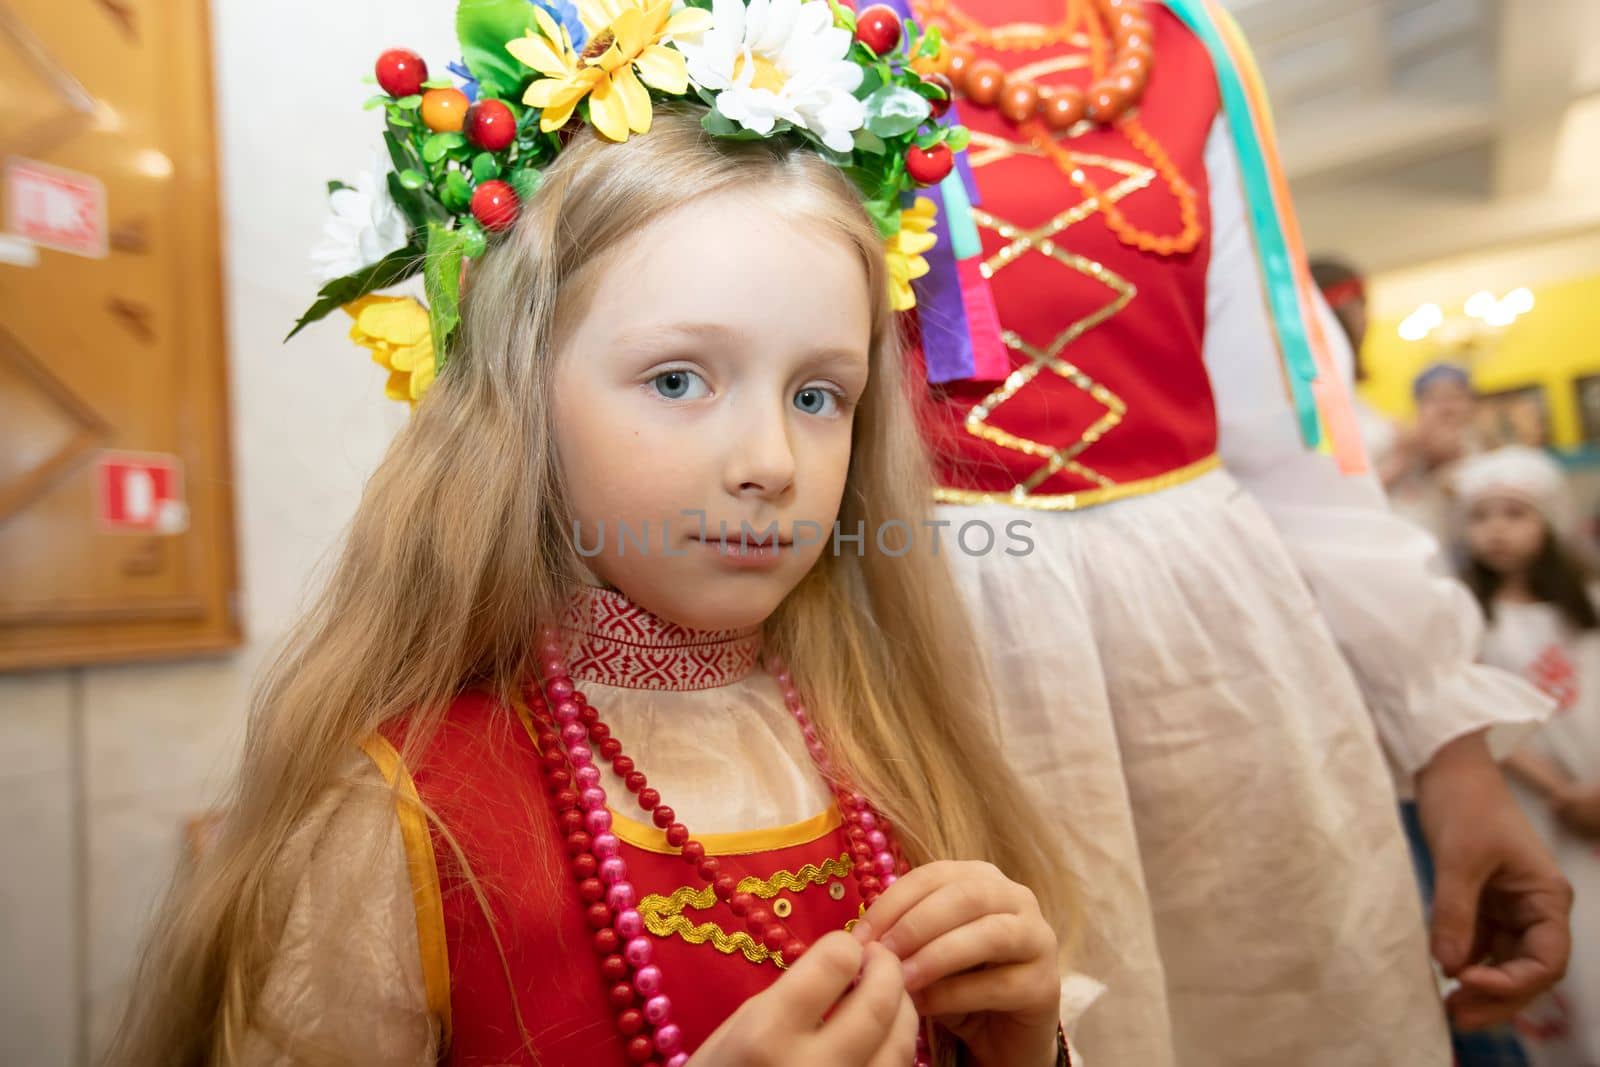 Belarus, the city of Gomil, May 21, 2021. Children's holiday. Ukrainian or Belarusian little girl in national costume.